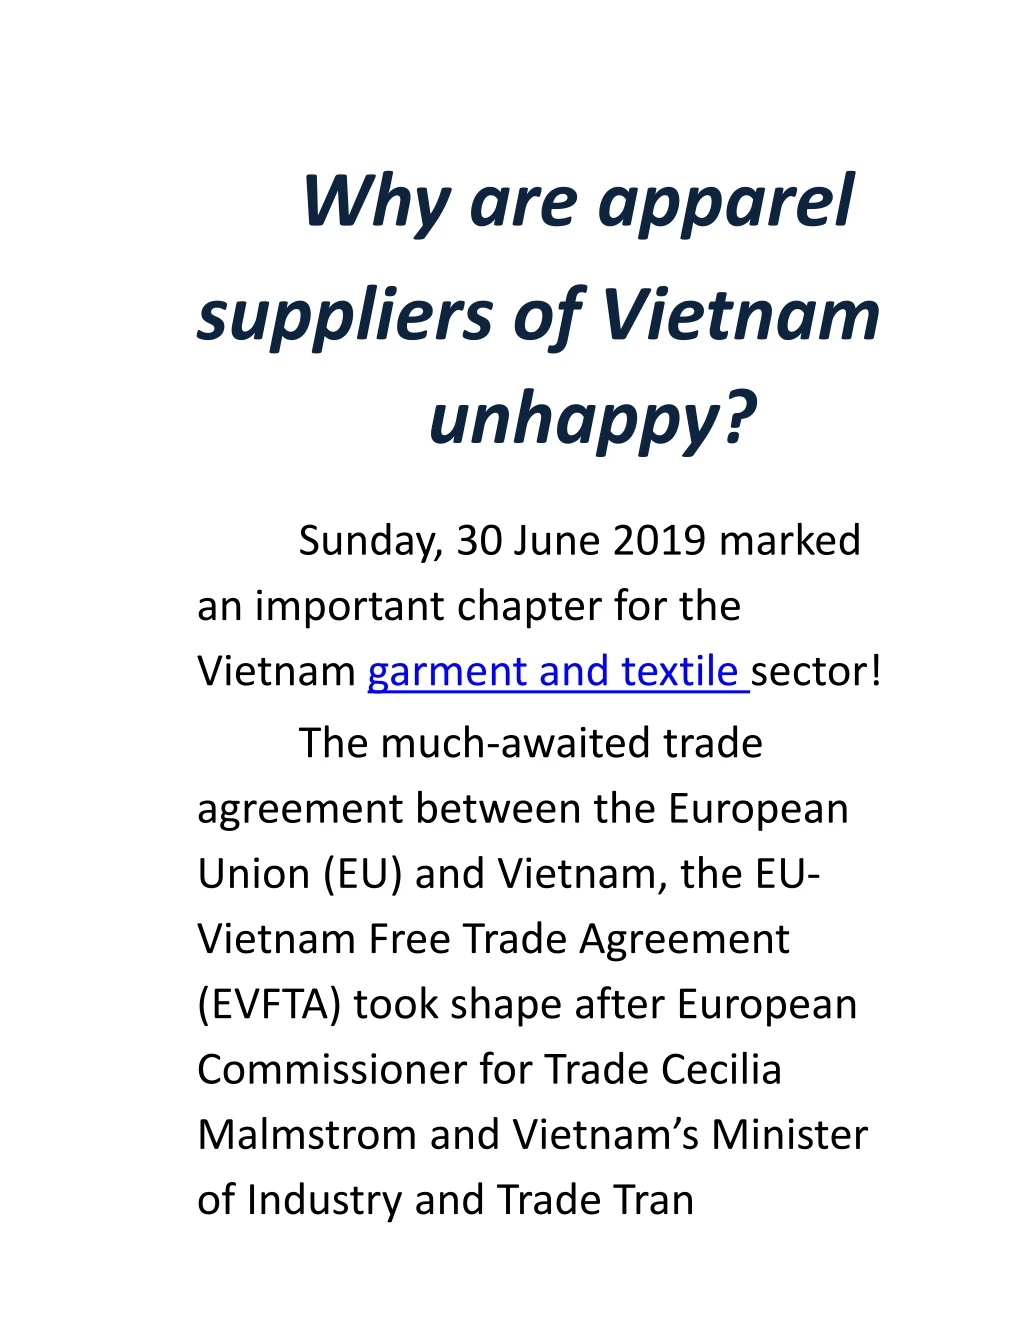 why are apparel suppliers of vietnam unhappy